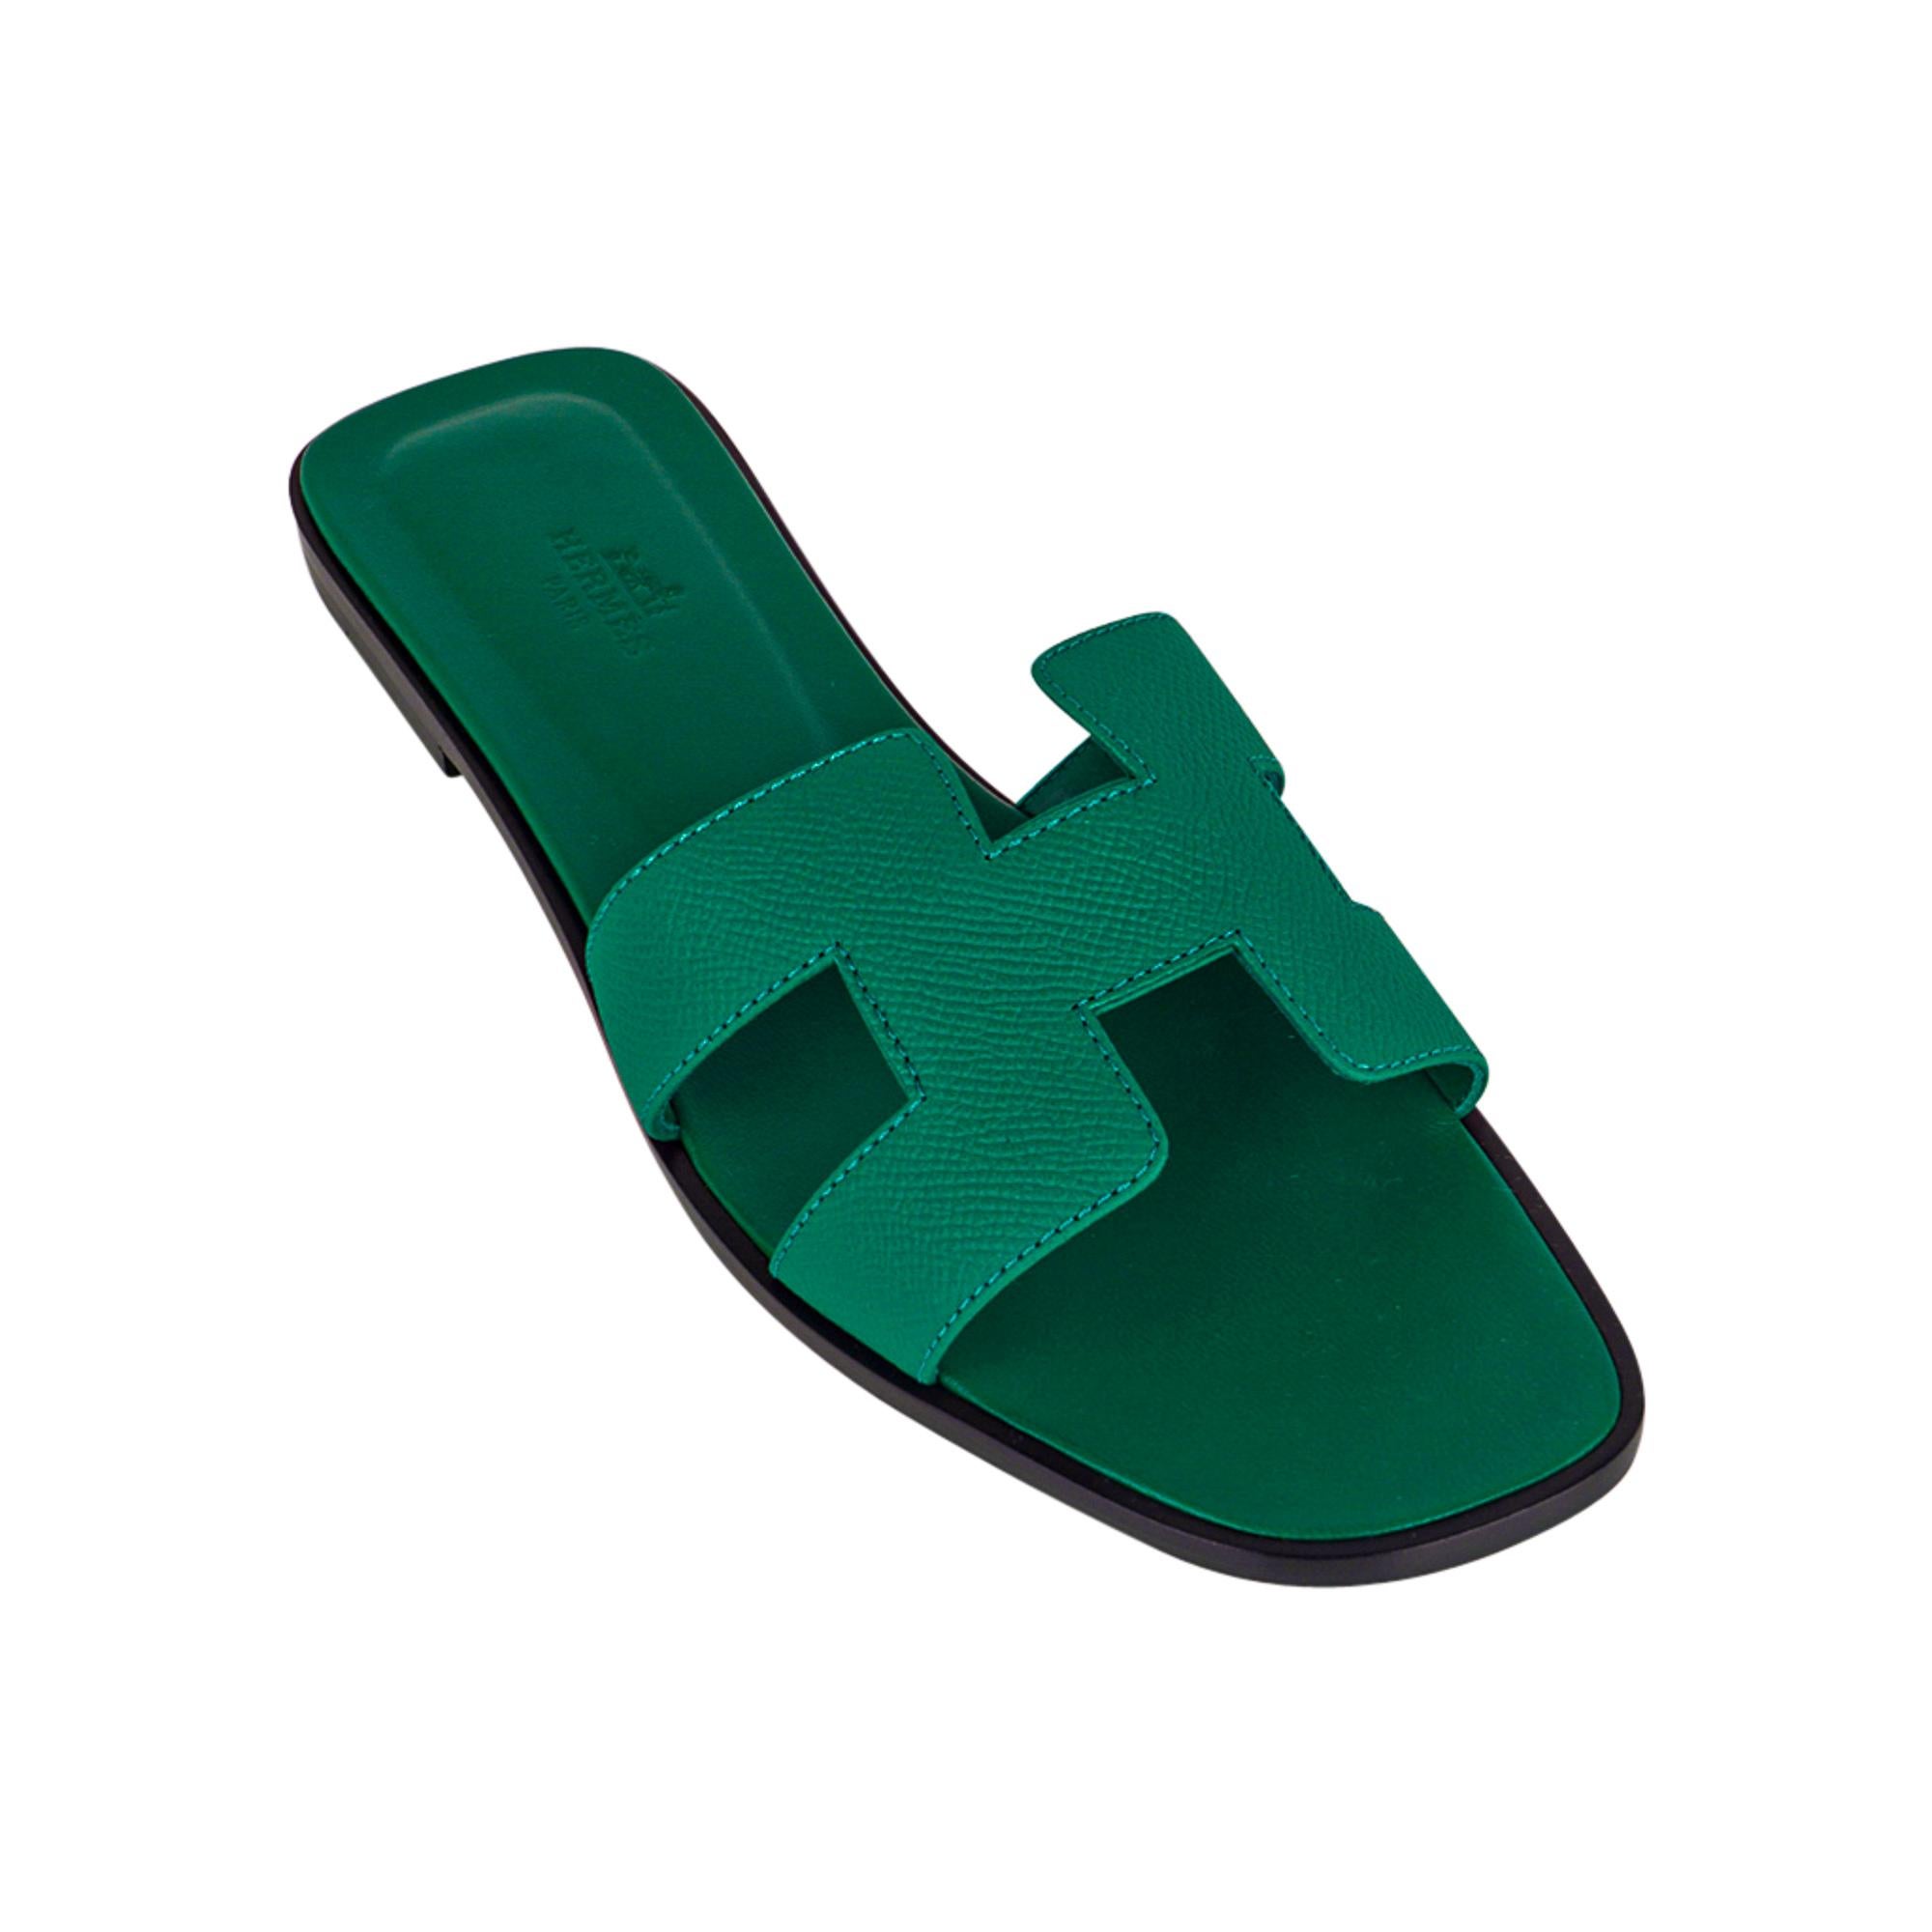 Mightychic offers limited edition Hermes Oran Emerald sandals.
This stunning limited edition Hermes Oran flat slide sandal is featured in Epsom leather.
The iconic H cutout over the top of the foot.
Emerald embossed calfskin insole.
Wood heel with